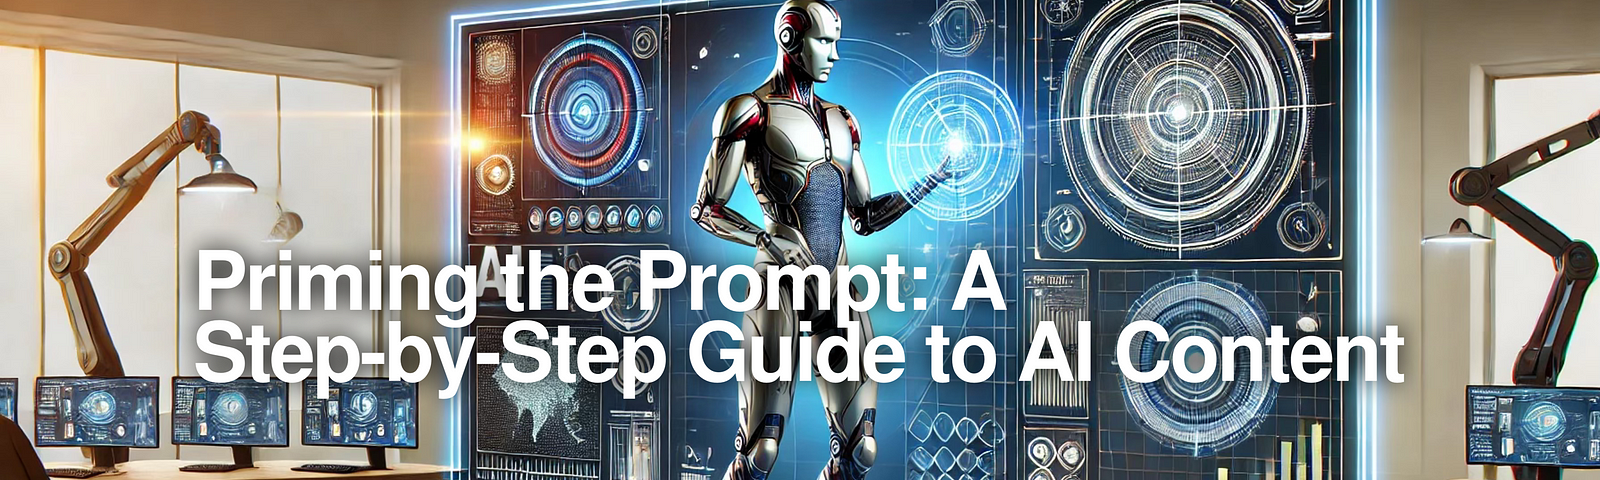 Priming the Prompt: A Step-by-Step Guide to AI Content | Adam M. Victor